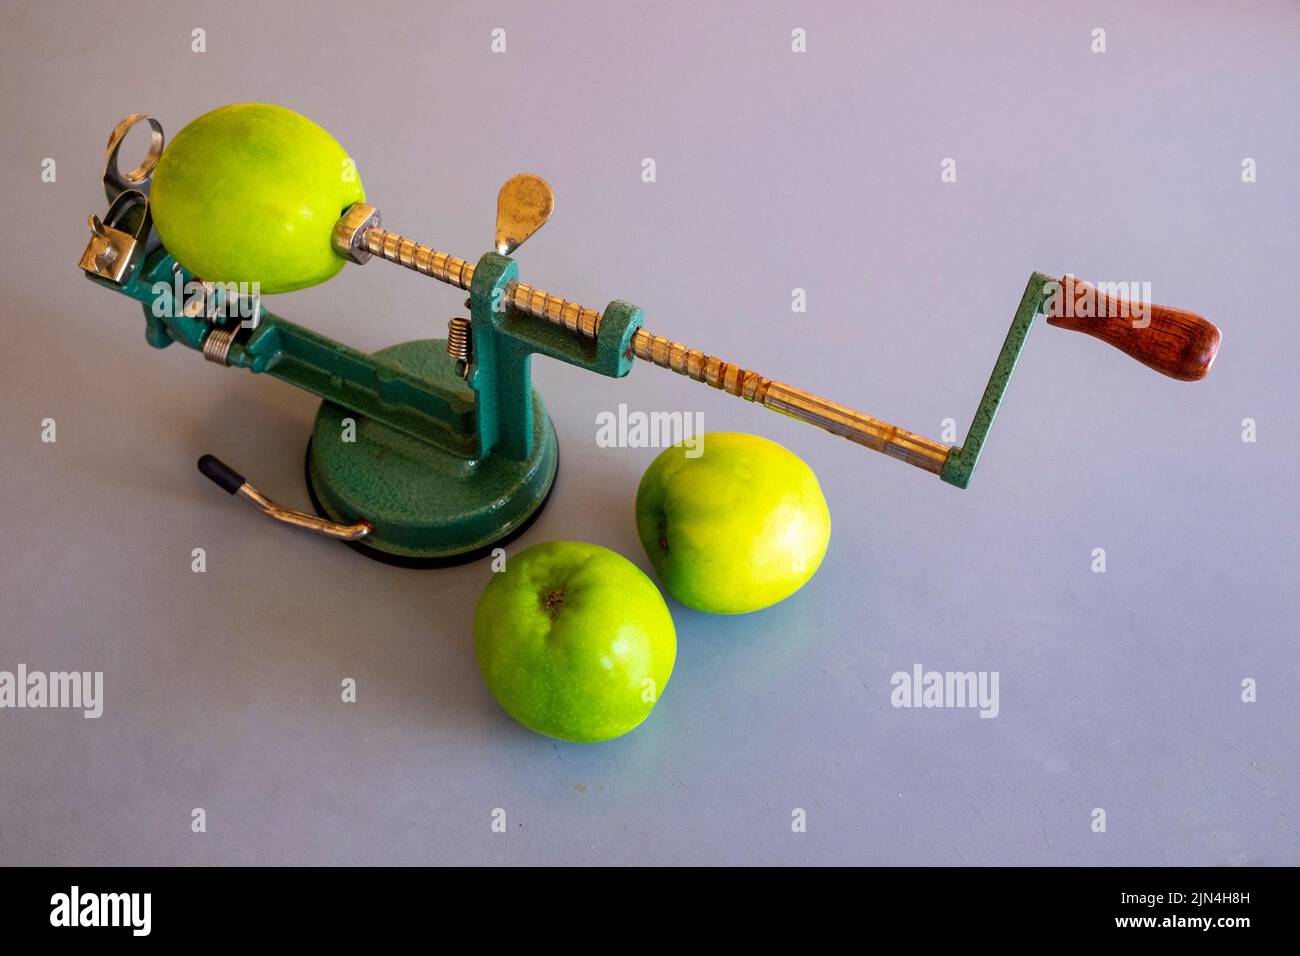 Apple coring and peeling device with cooking apples Stock Photo